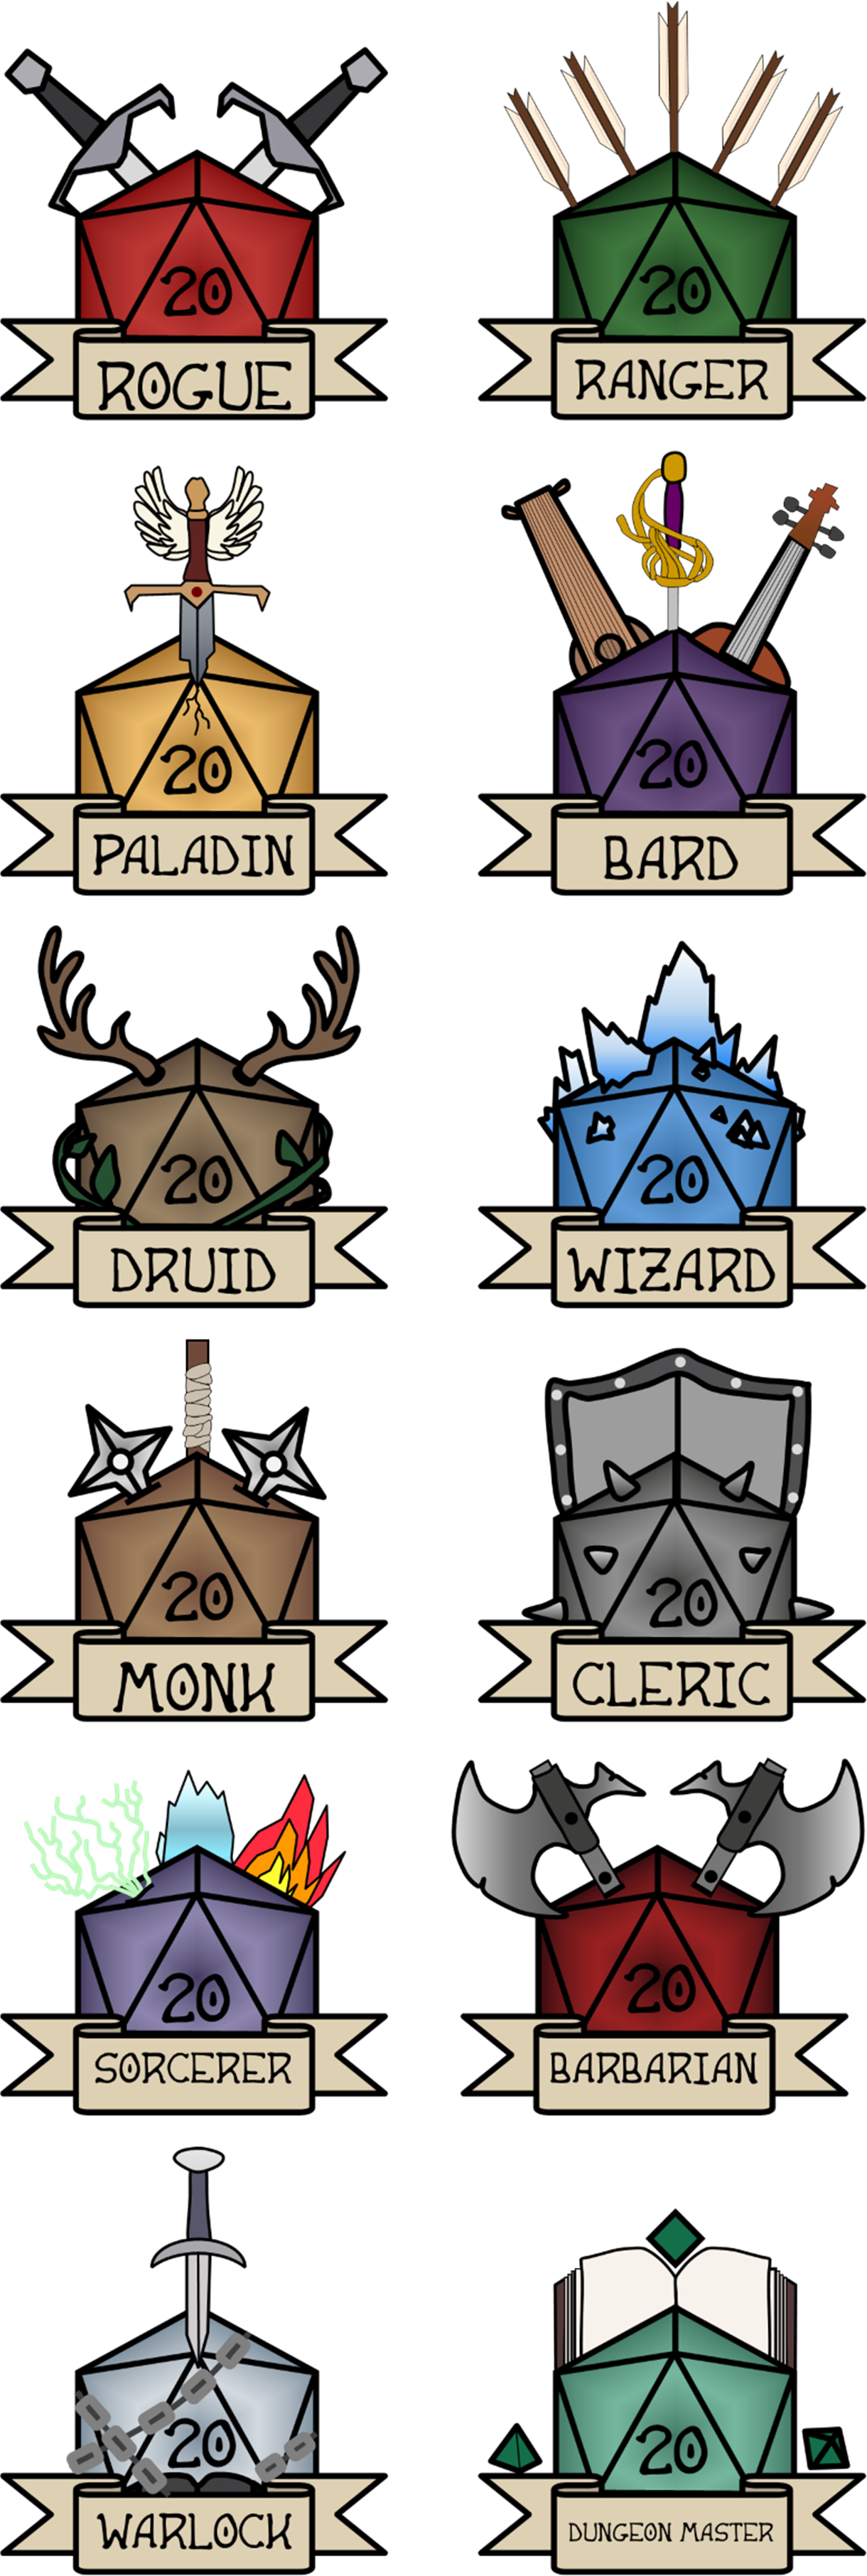 D&D dice for different characters.